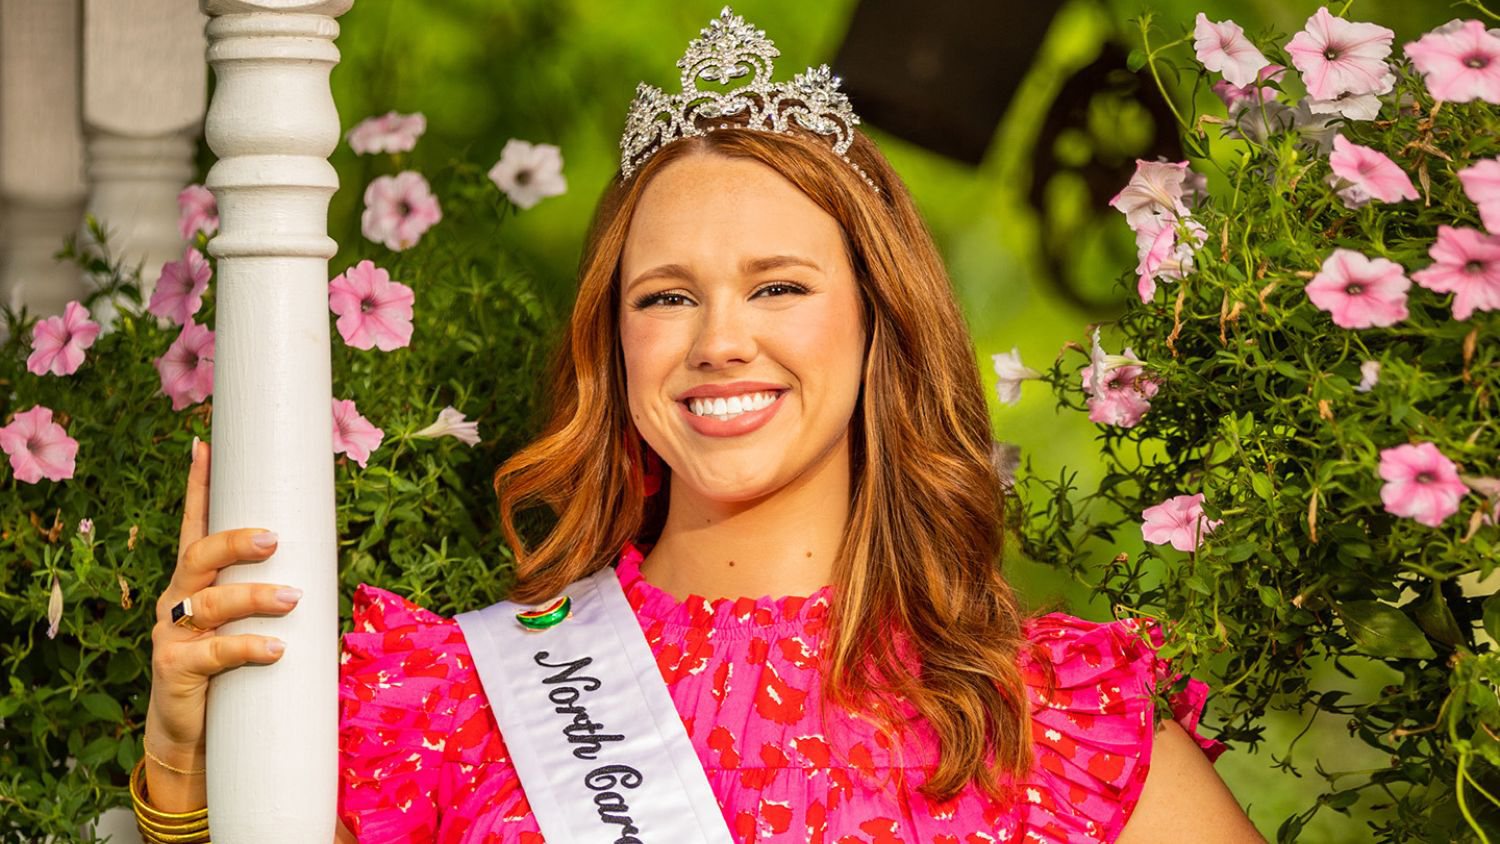 Gracy Peterson, a CALS student majoring in agricultural business management, is the 2023 North Carolina Watermelon Queen. Photo provided by Gracy Peterson